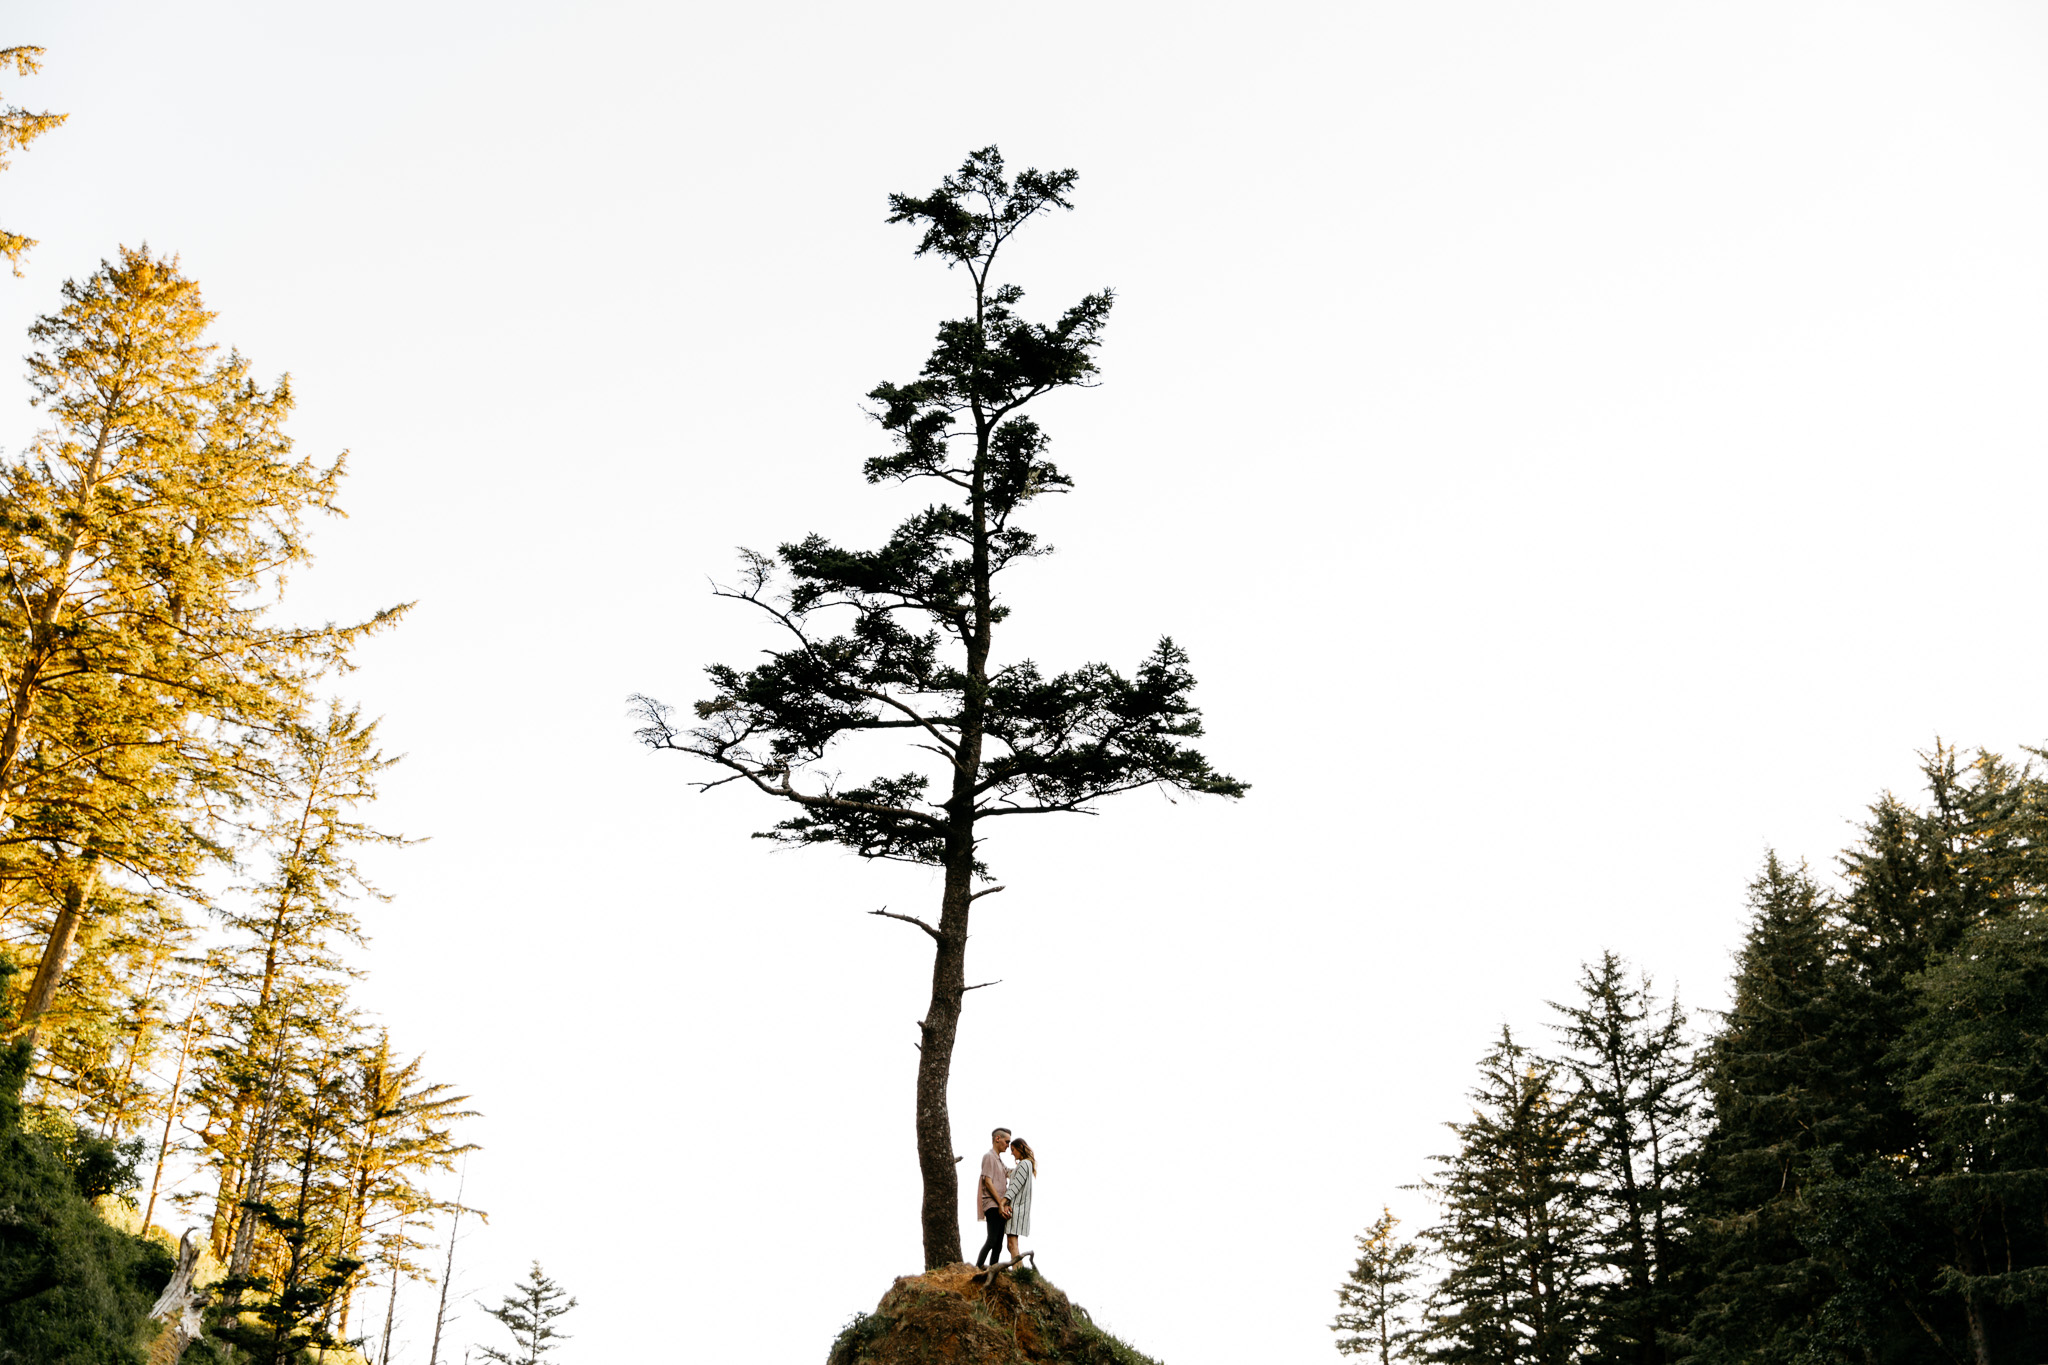 Engagement Session at Cape Disappointment Brittney Hyatt Photography